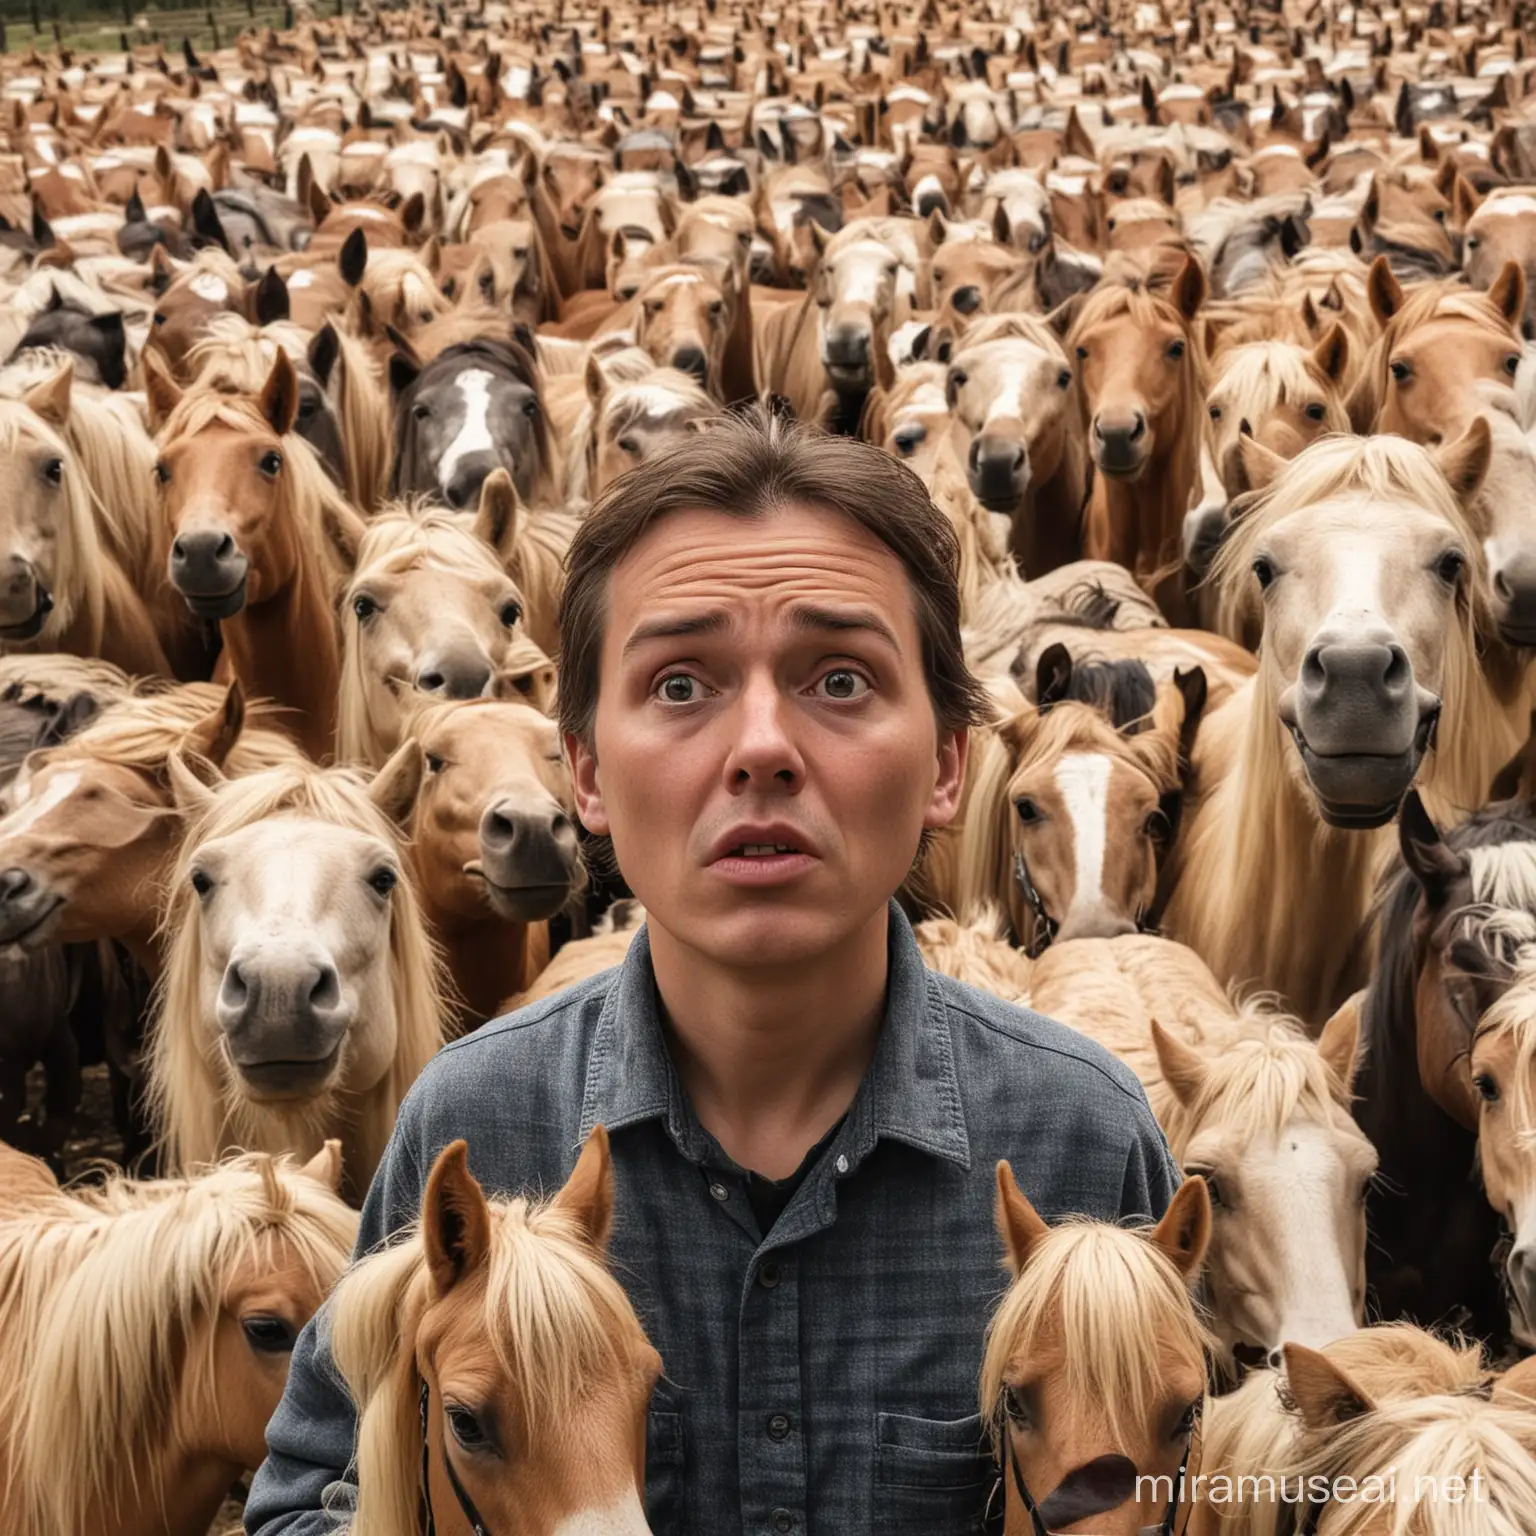 a worried looking person with a hundred smallhorses behind menacingly
